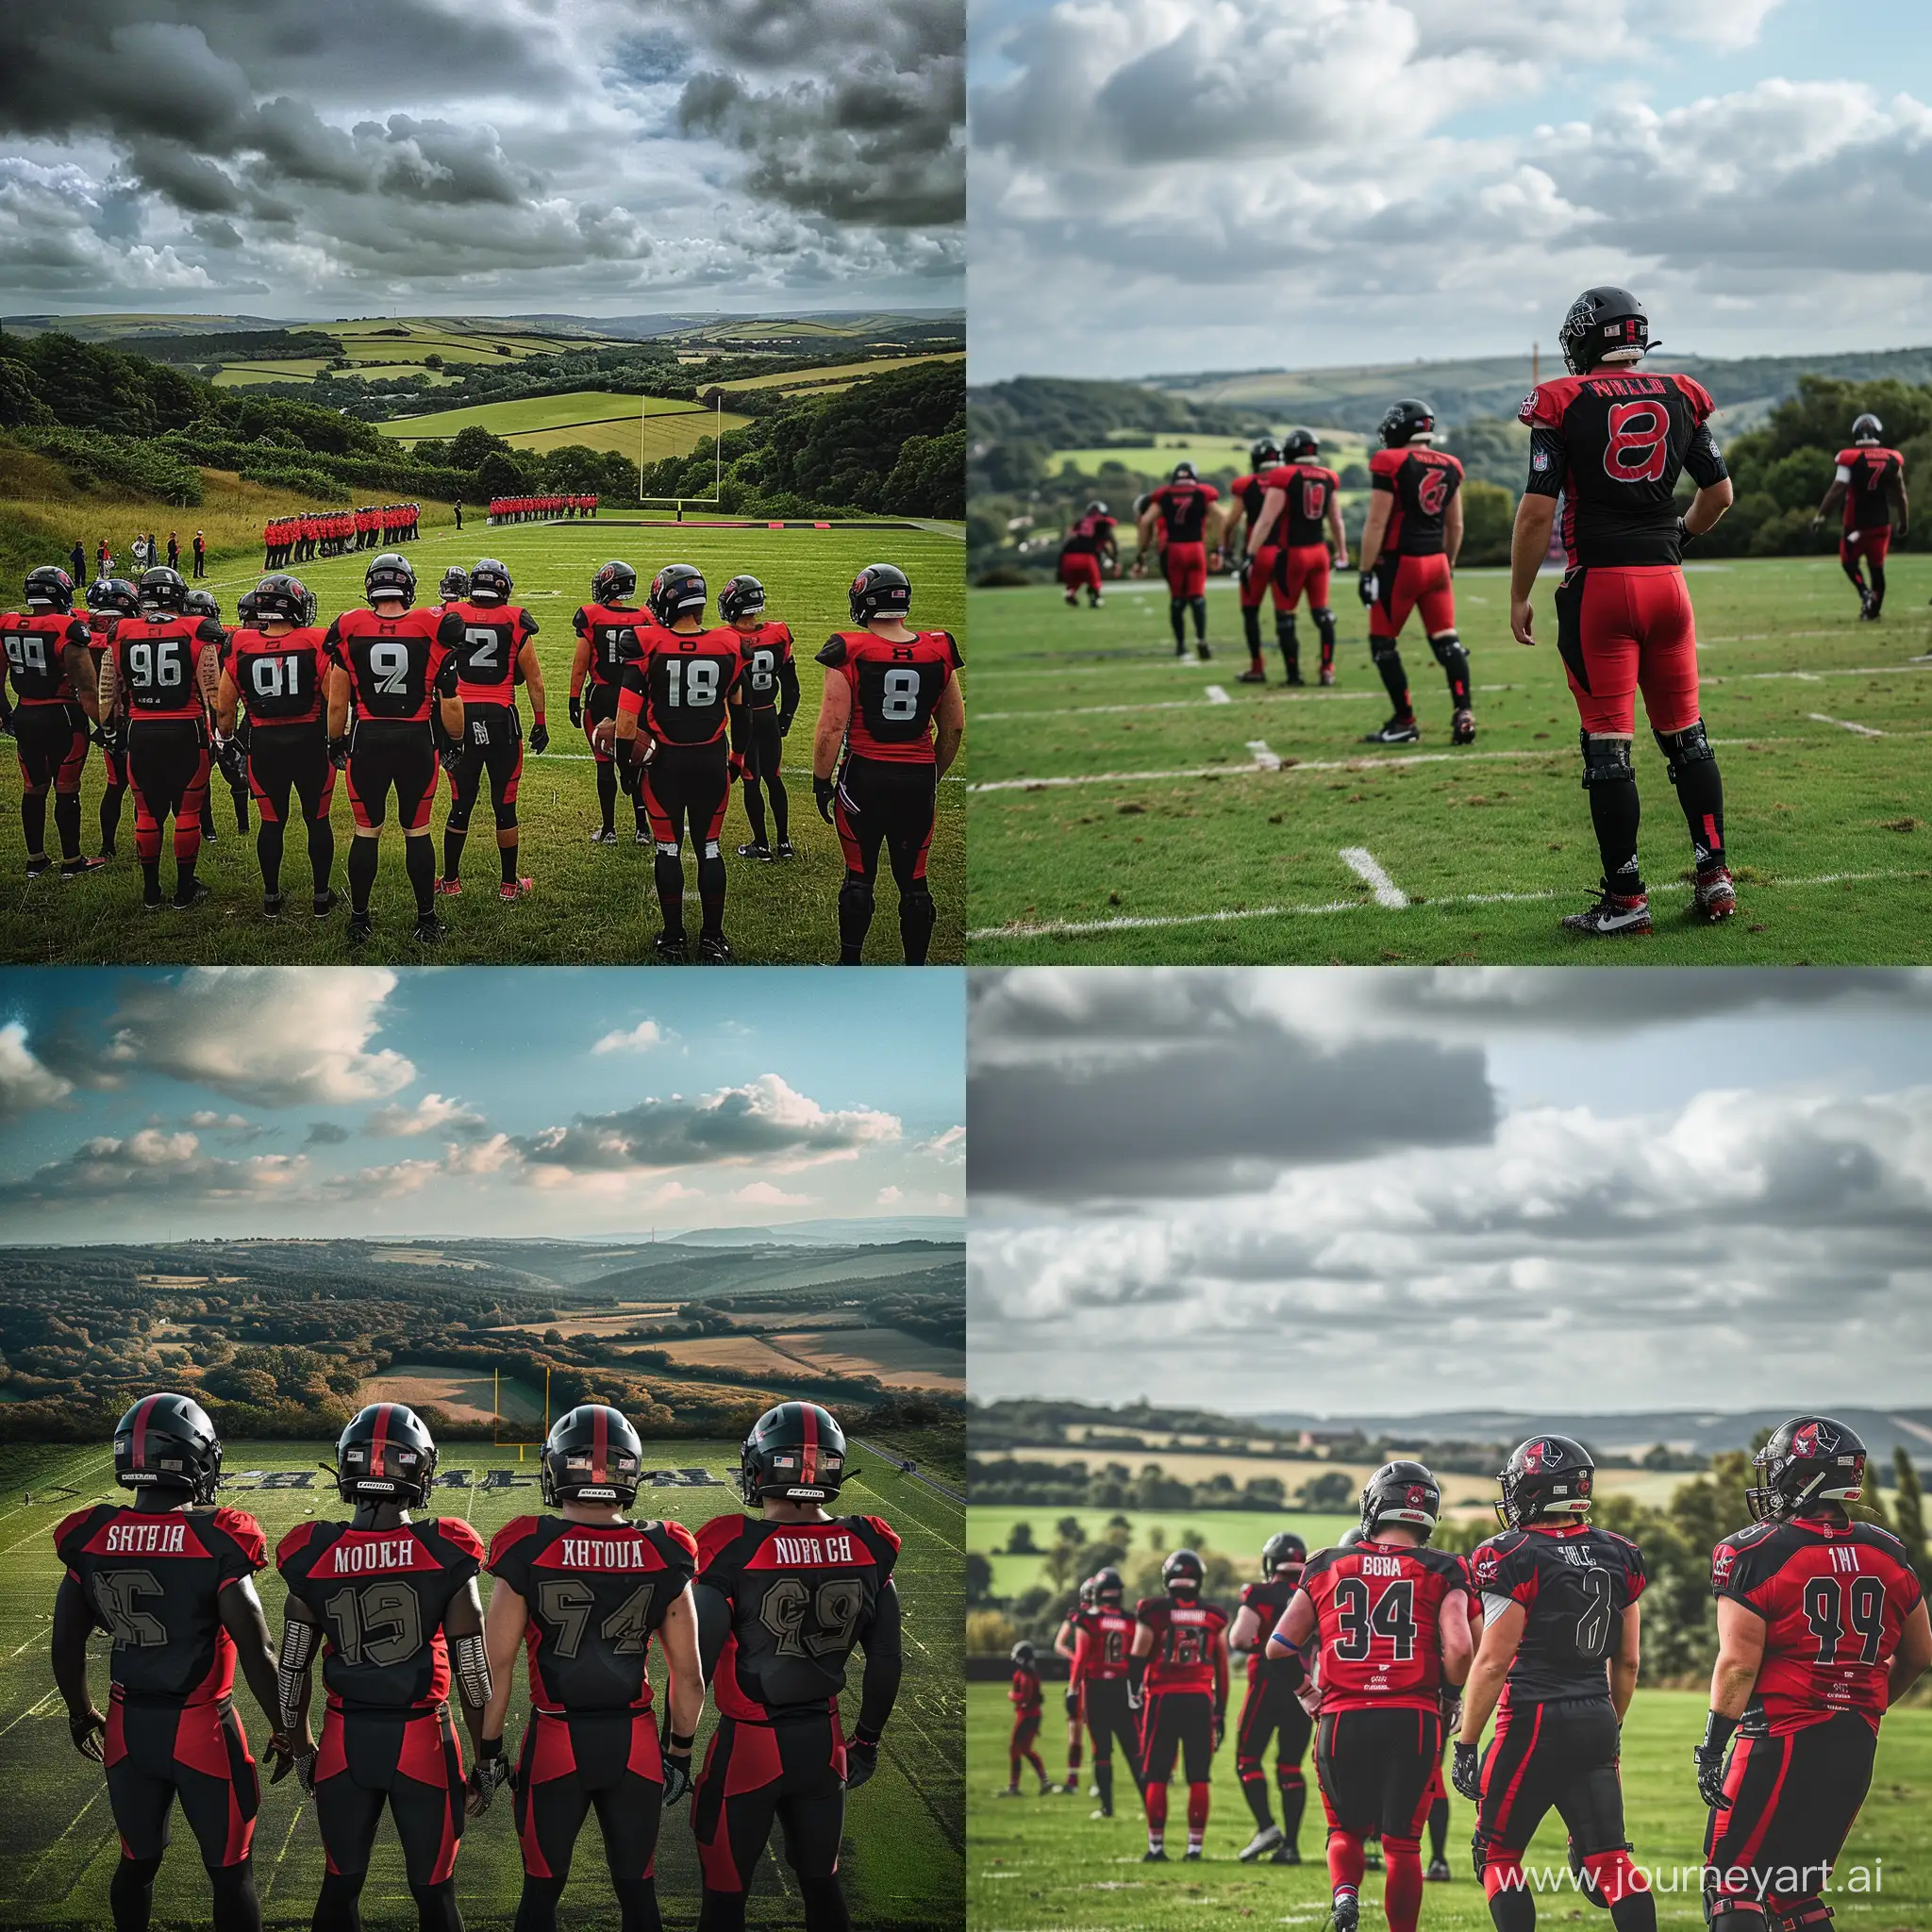 I want a picture of football players in red and black uniforms on an open field surrounded by lush greenery overlooking the countryside in a sports session. --v 6 --ar 1:1 --no 71243